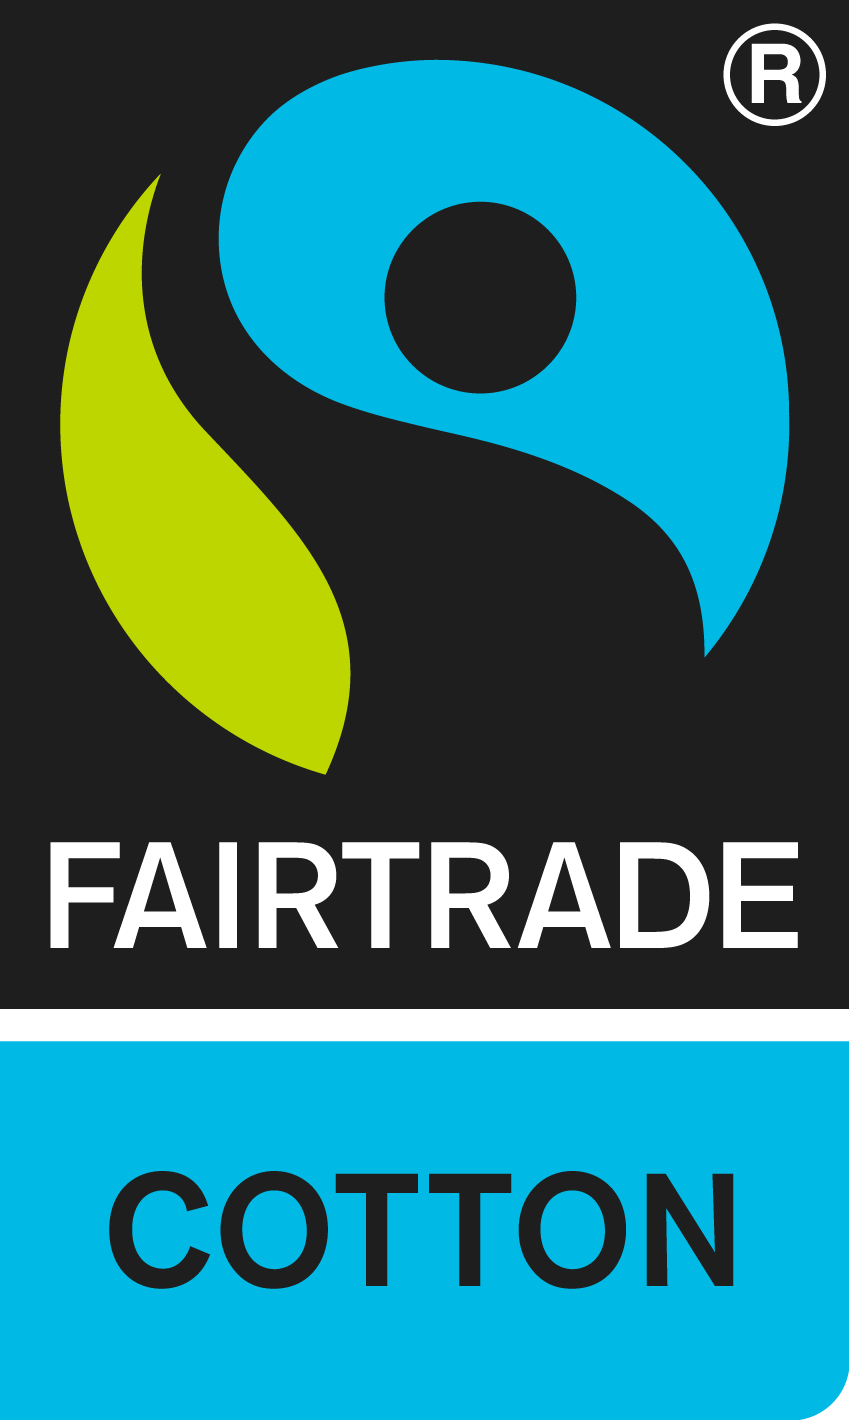 It's Fair To Say... We're In A Fairtrade Frenzy